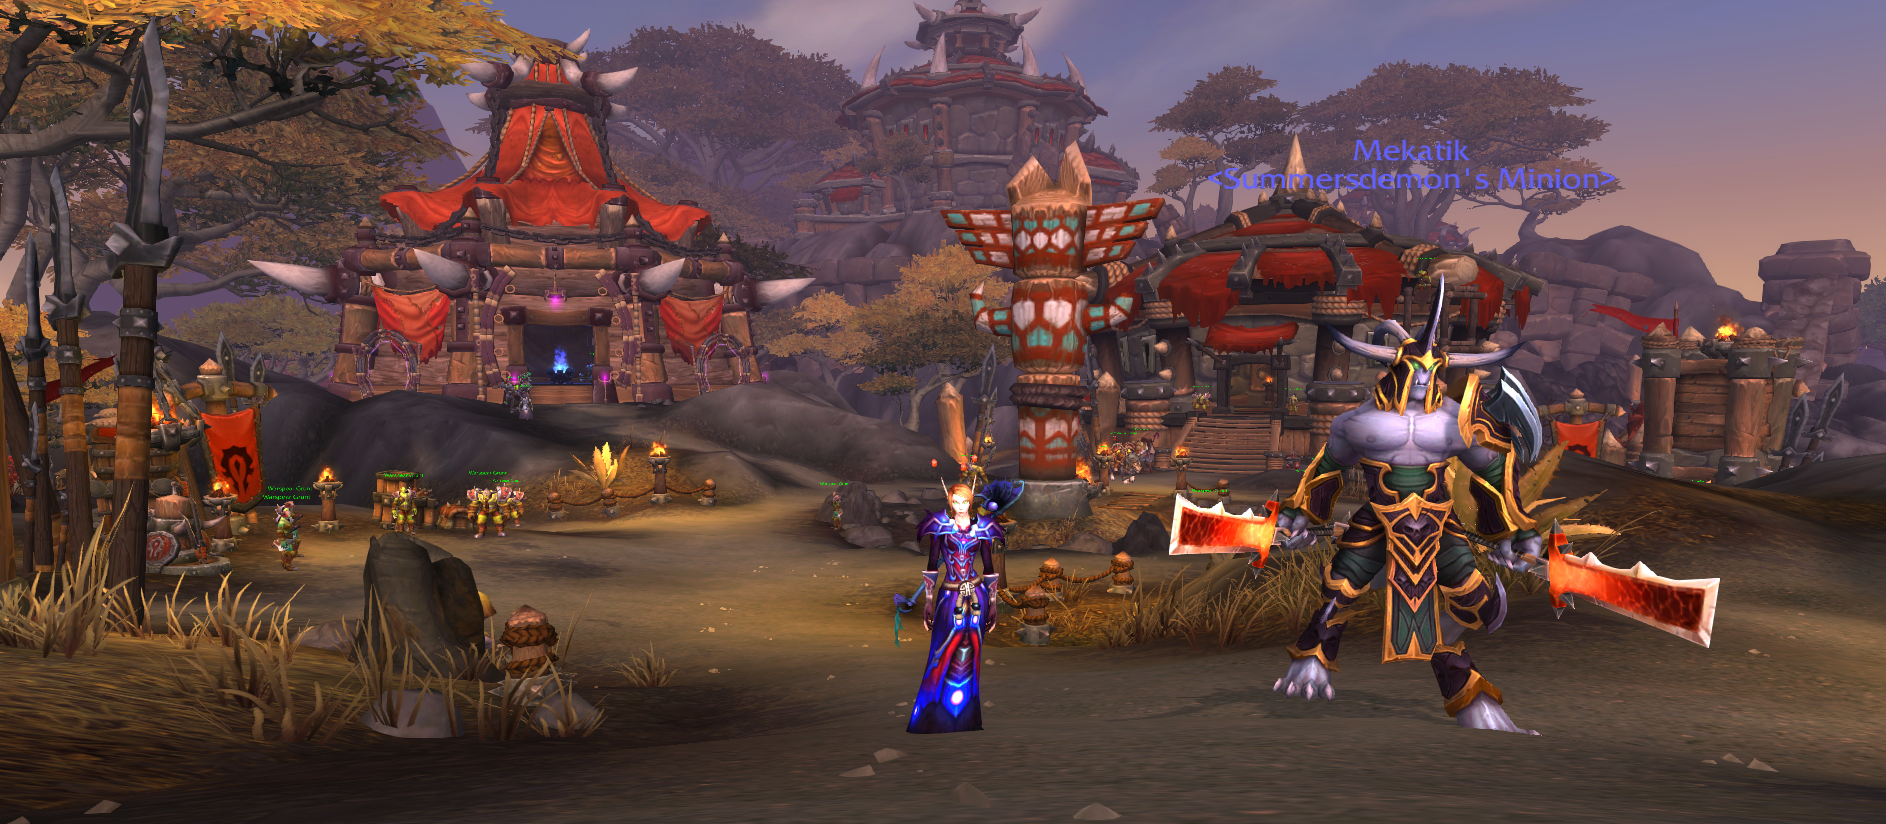 This is Warspear, a Horde controlled city in WOW. Image by Jana Allmand-Zeman